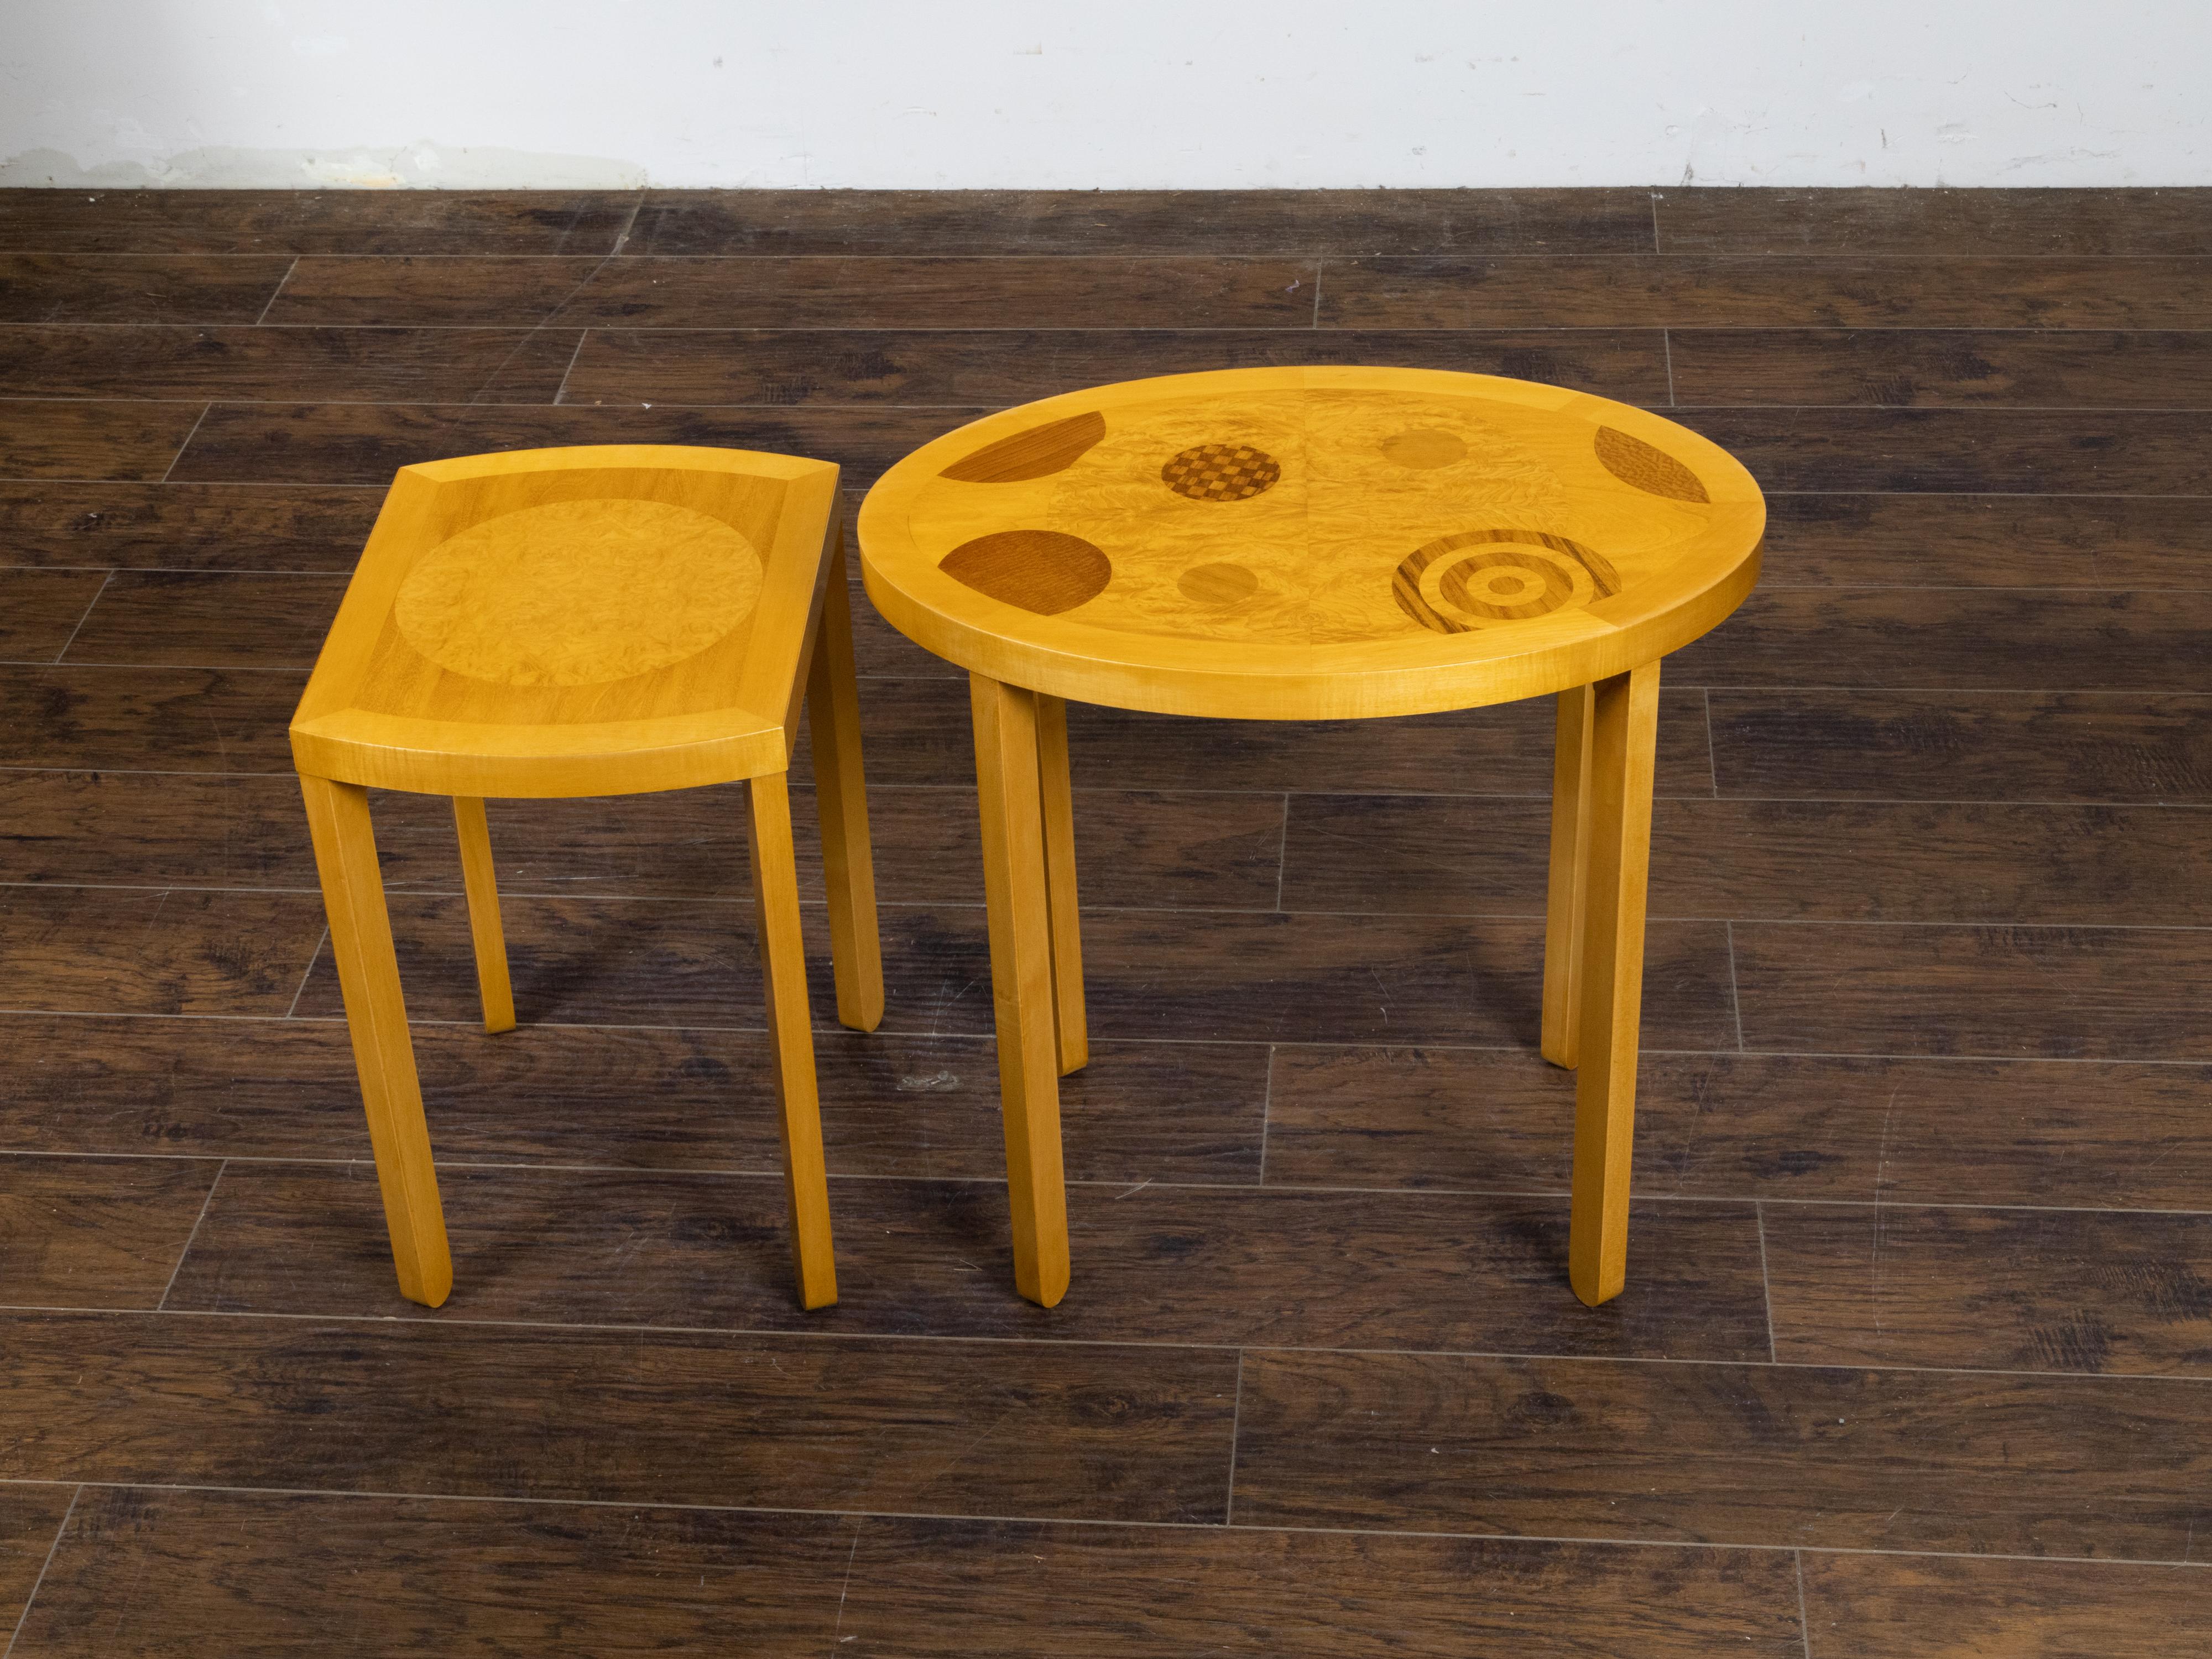 Baker Furniture Art Deco Style Nesting Tables with Whimsical Geometric Motifs In Good Condition For Sale In Atlanta, GA